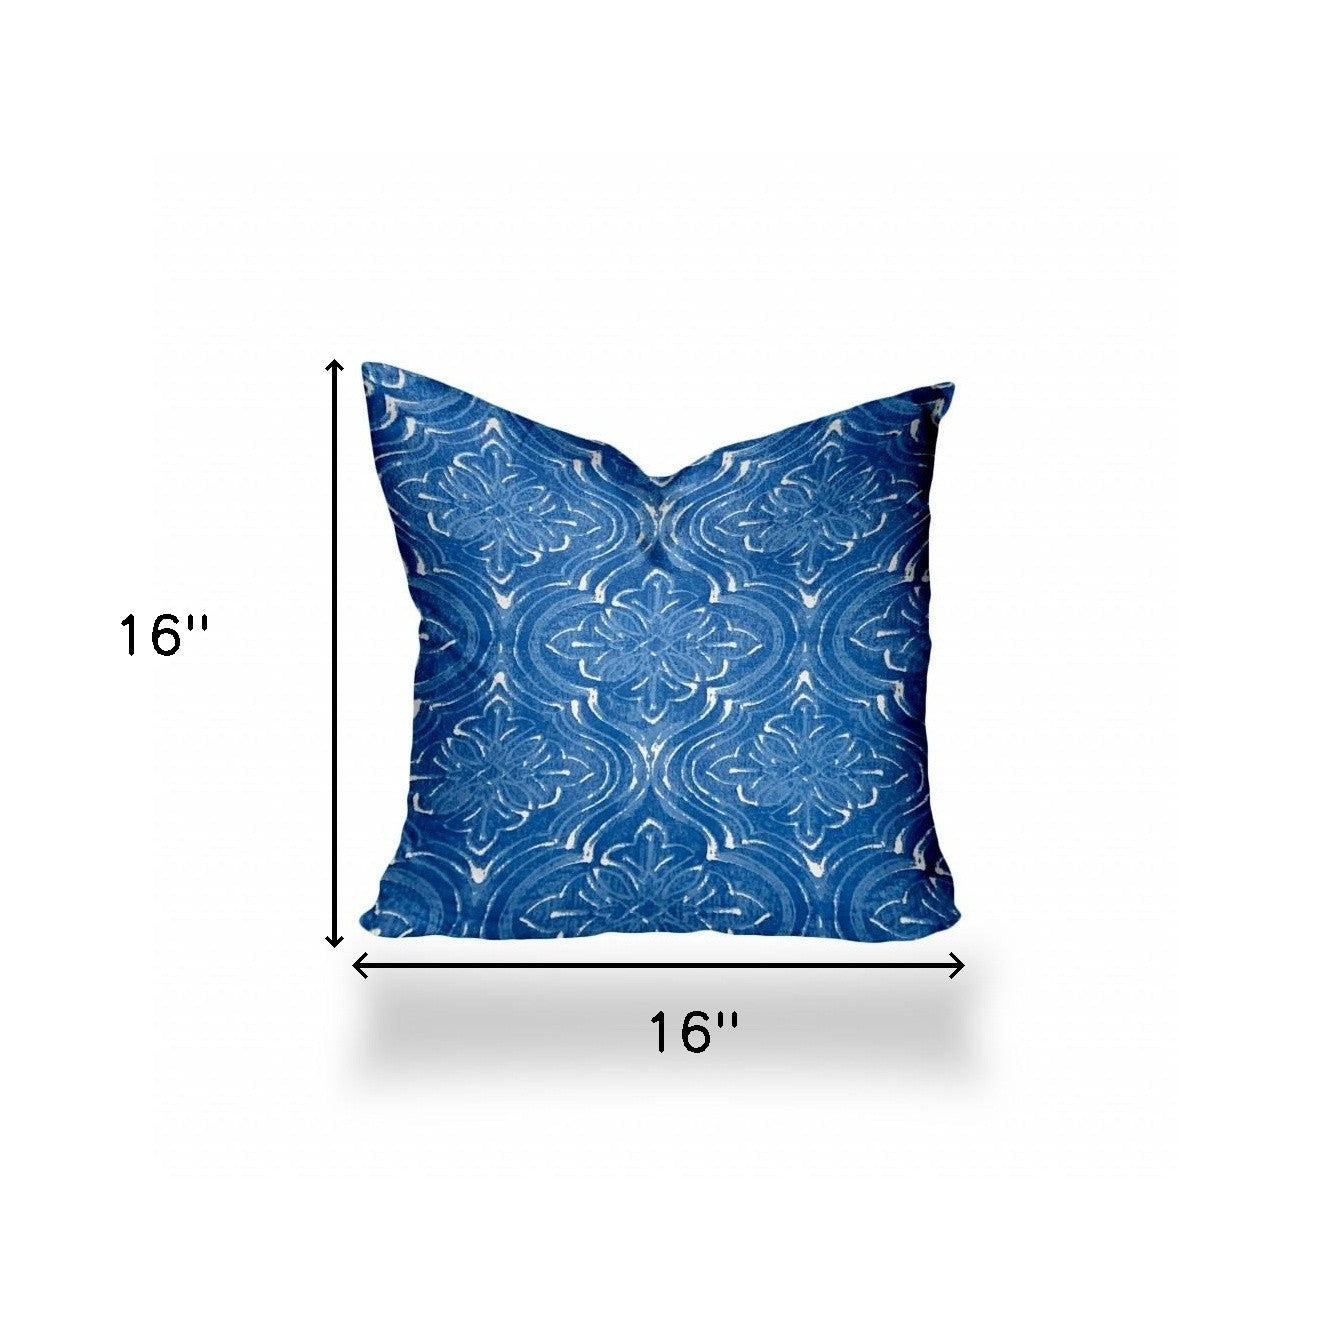 16" X 16" Blue And White Enveloped Ikat Throw Indoor Outdoor Pillow Cover